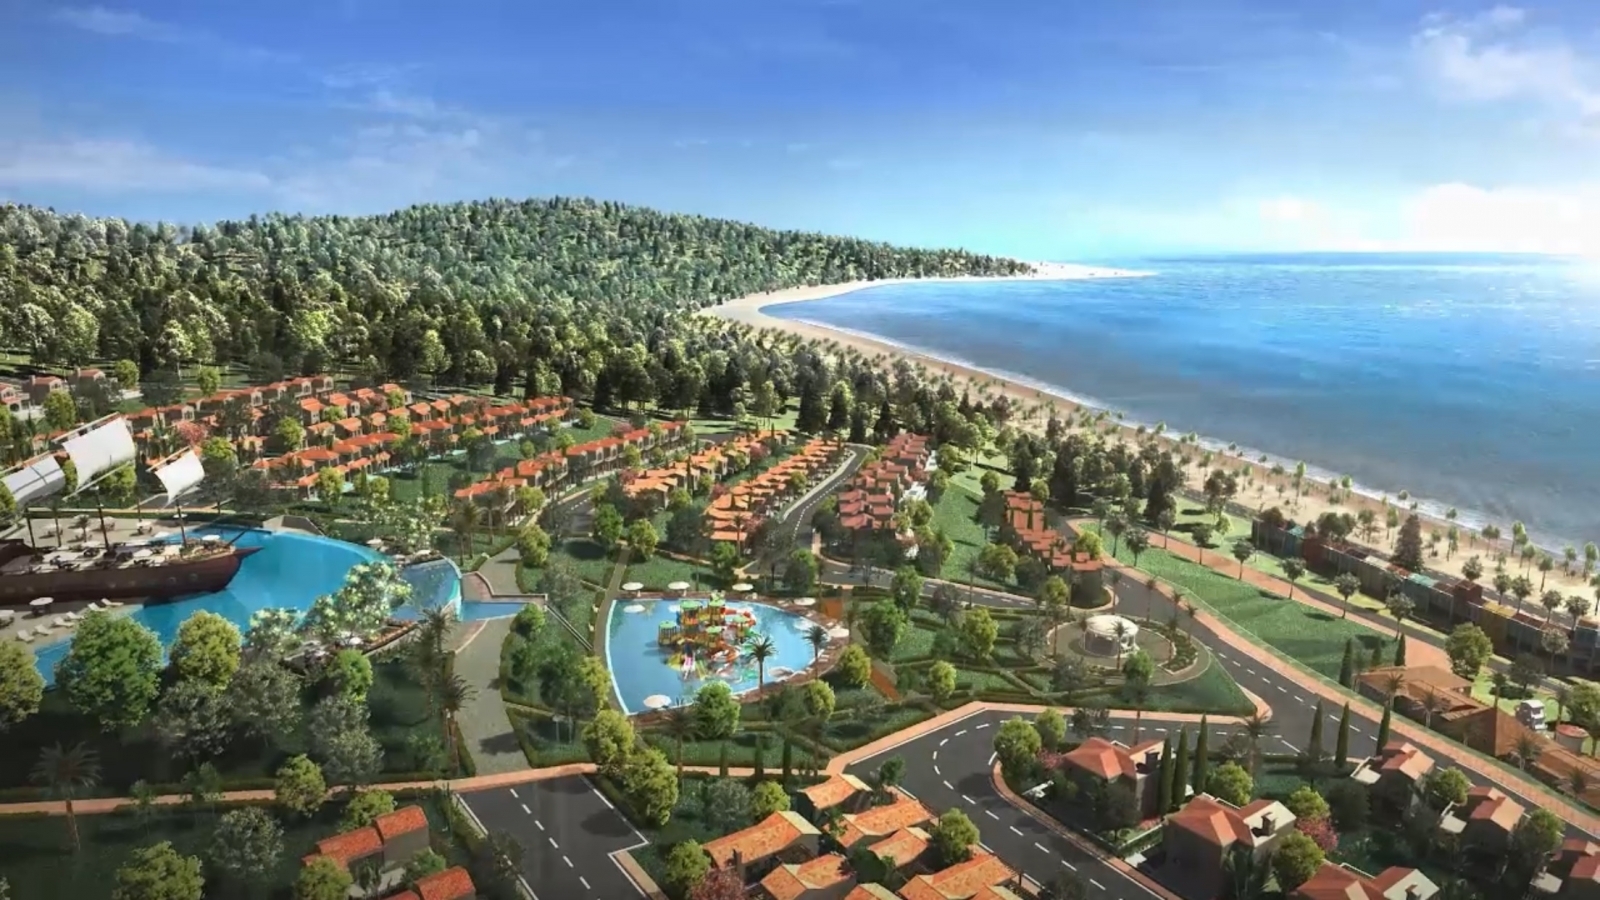 Mui Ne tourism – opportunities for international hospitality projects